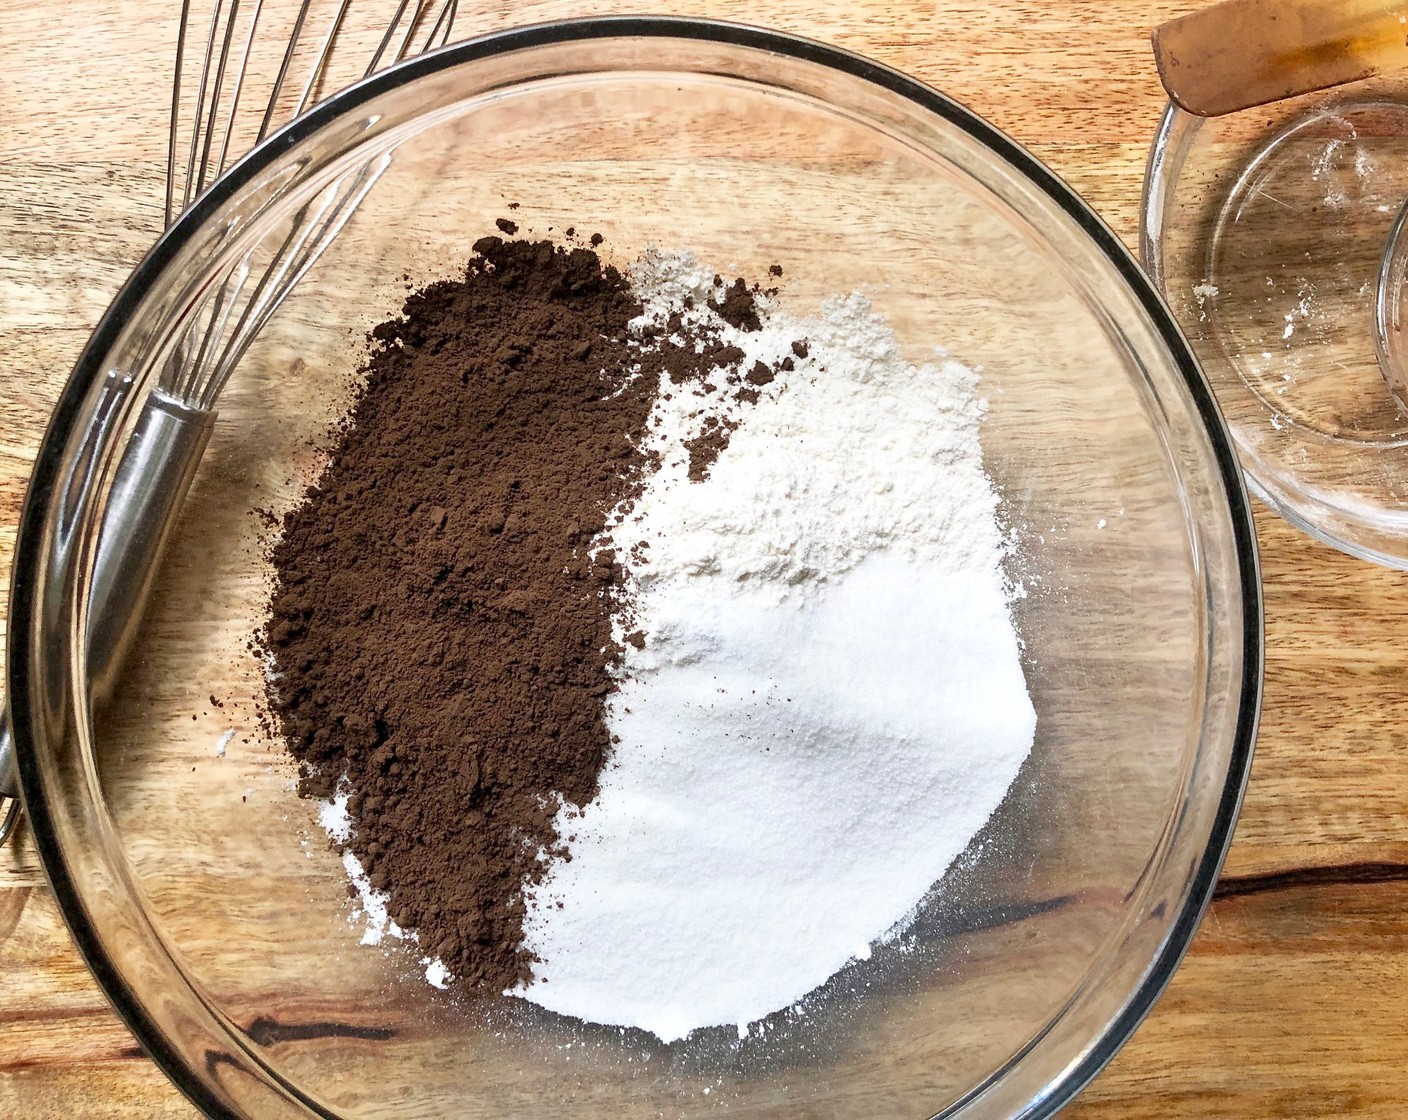 step 3 In a large bowl, whisk together All-Purpose Flour (1 3/4 cups), Unsweetened Cocoa Powder (1 cup) (plus 1 Tbsp), Baking Powder (1/2 Tbsp), Baking Soda (3/4 tsp), Granulated Sugar (1/3 cup) and Kosher Salt (1/2 tsp) until thoroughly combined.